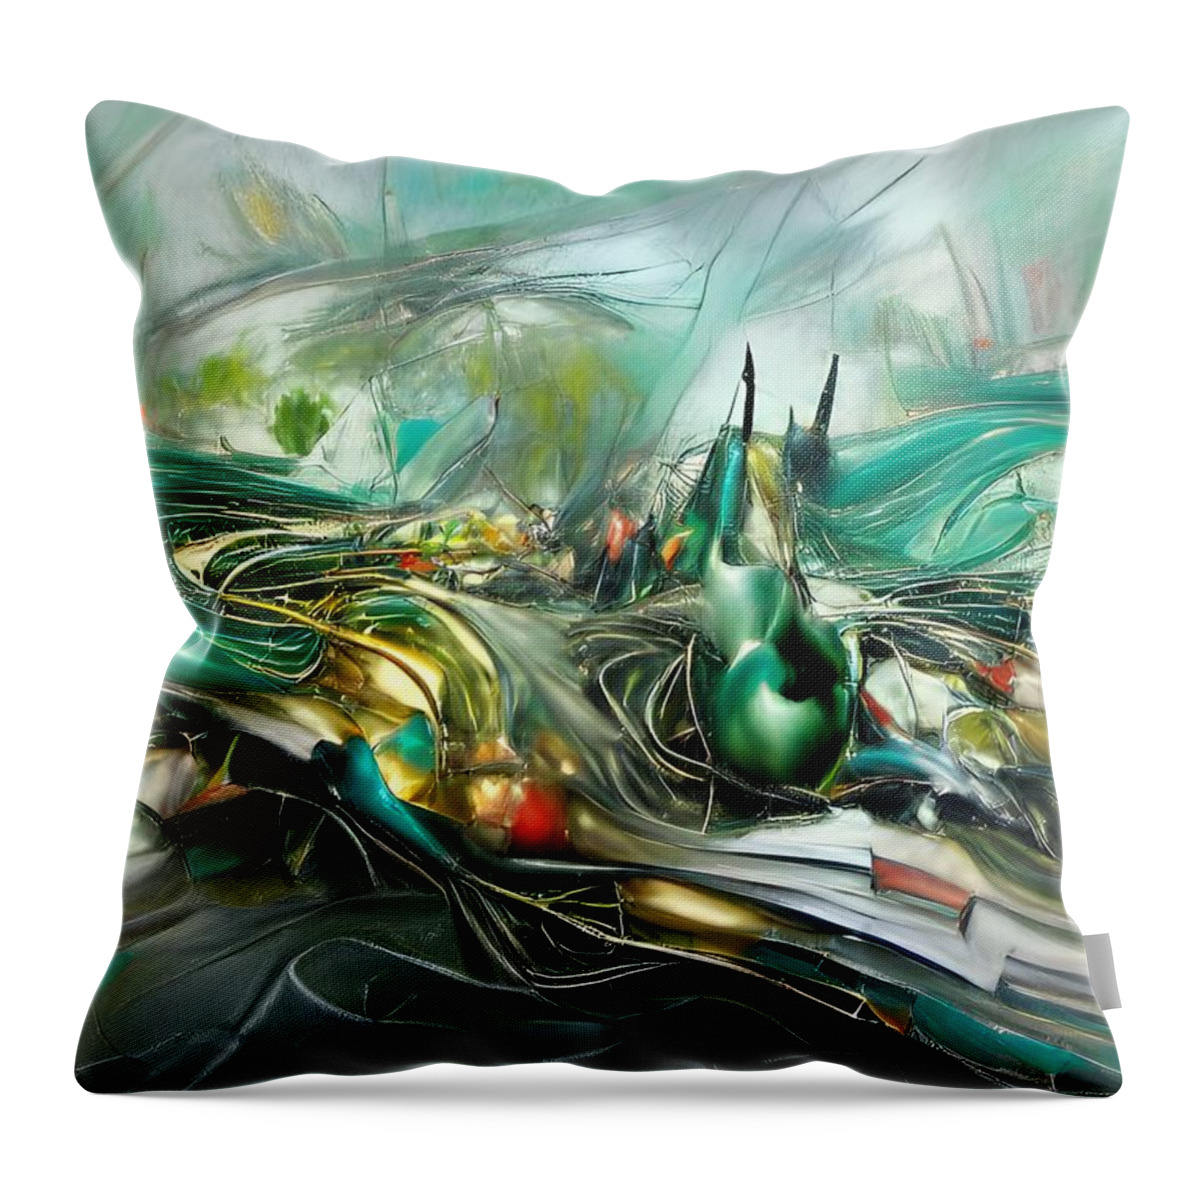 Green Throw Pillow featuring the digital art Lyrical Greens by Beverly Read